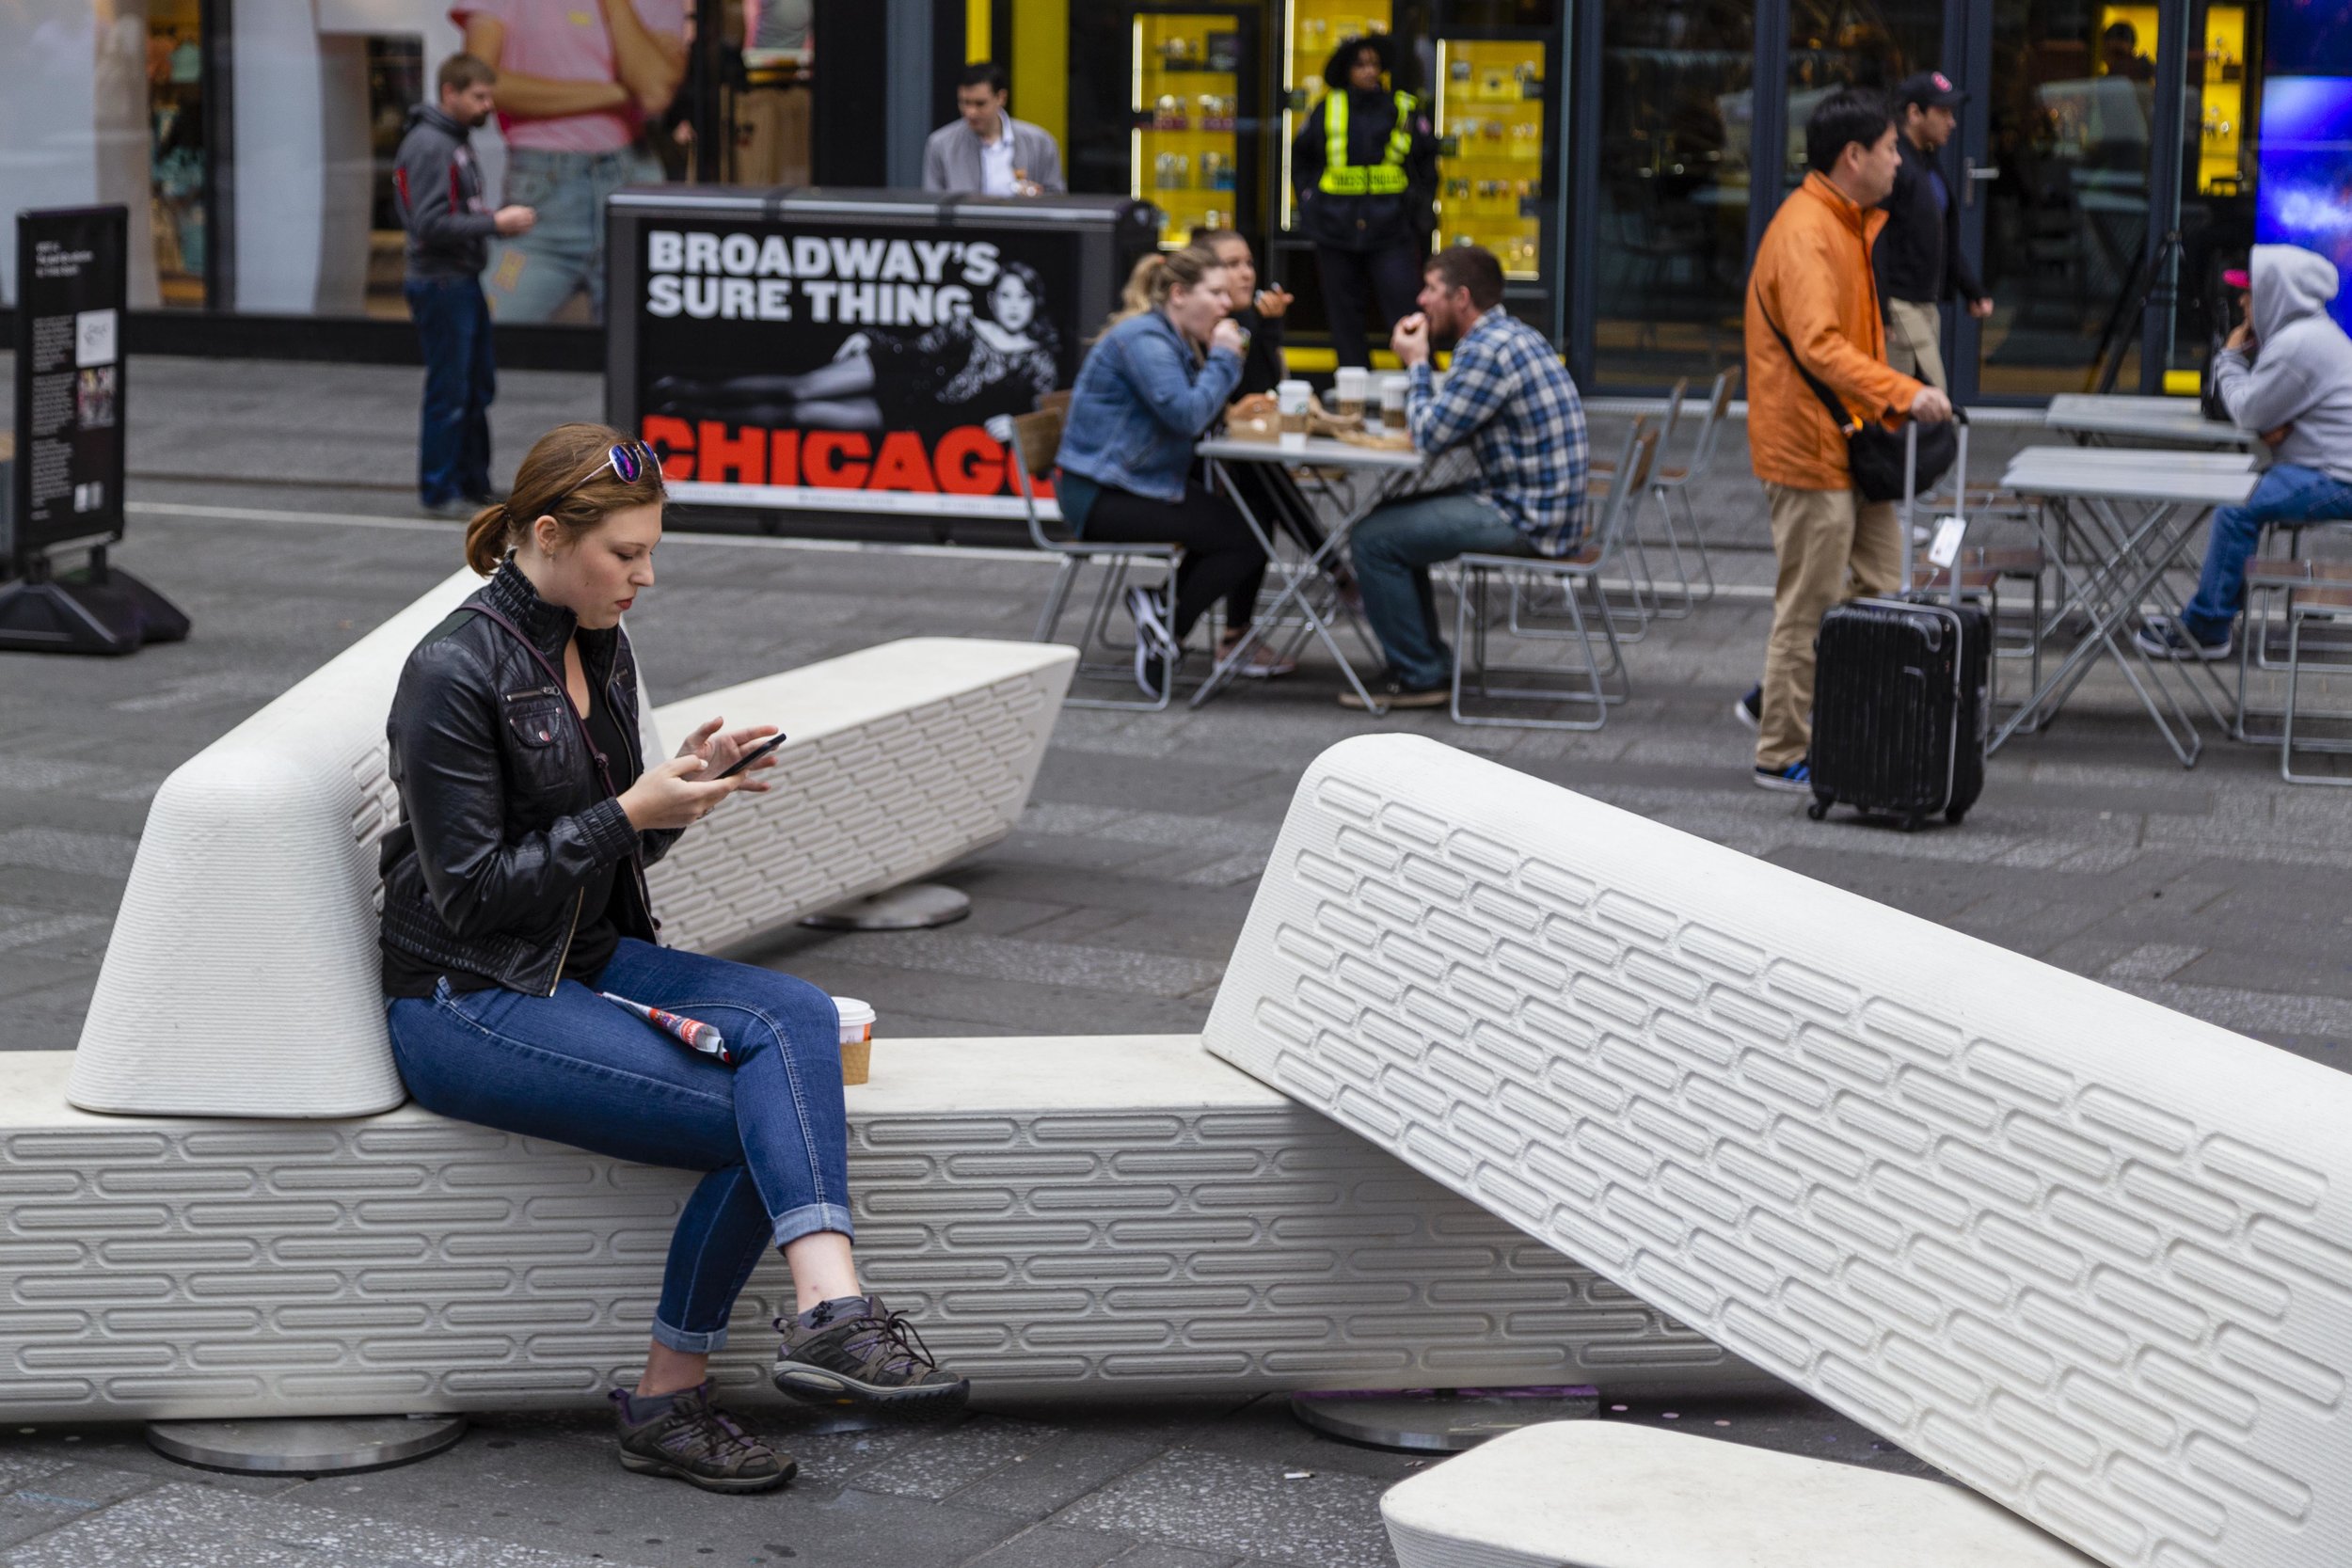 New 3D-printed, crash-proof debut benches in Square Times